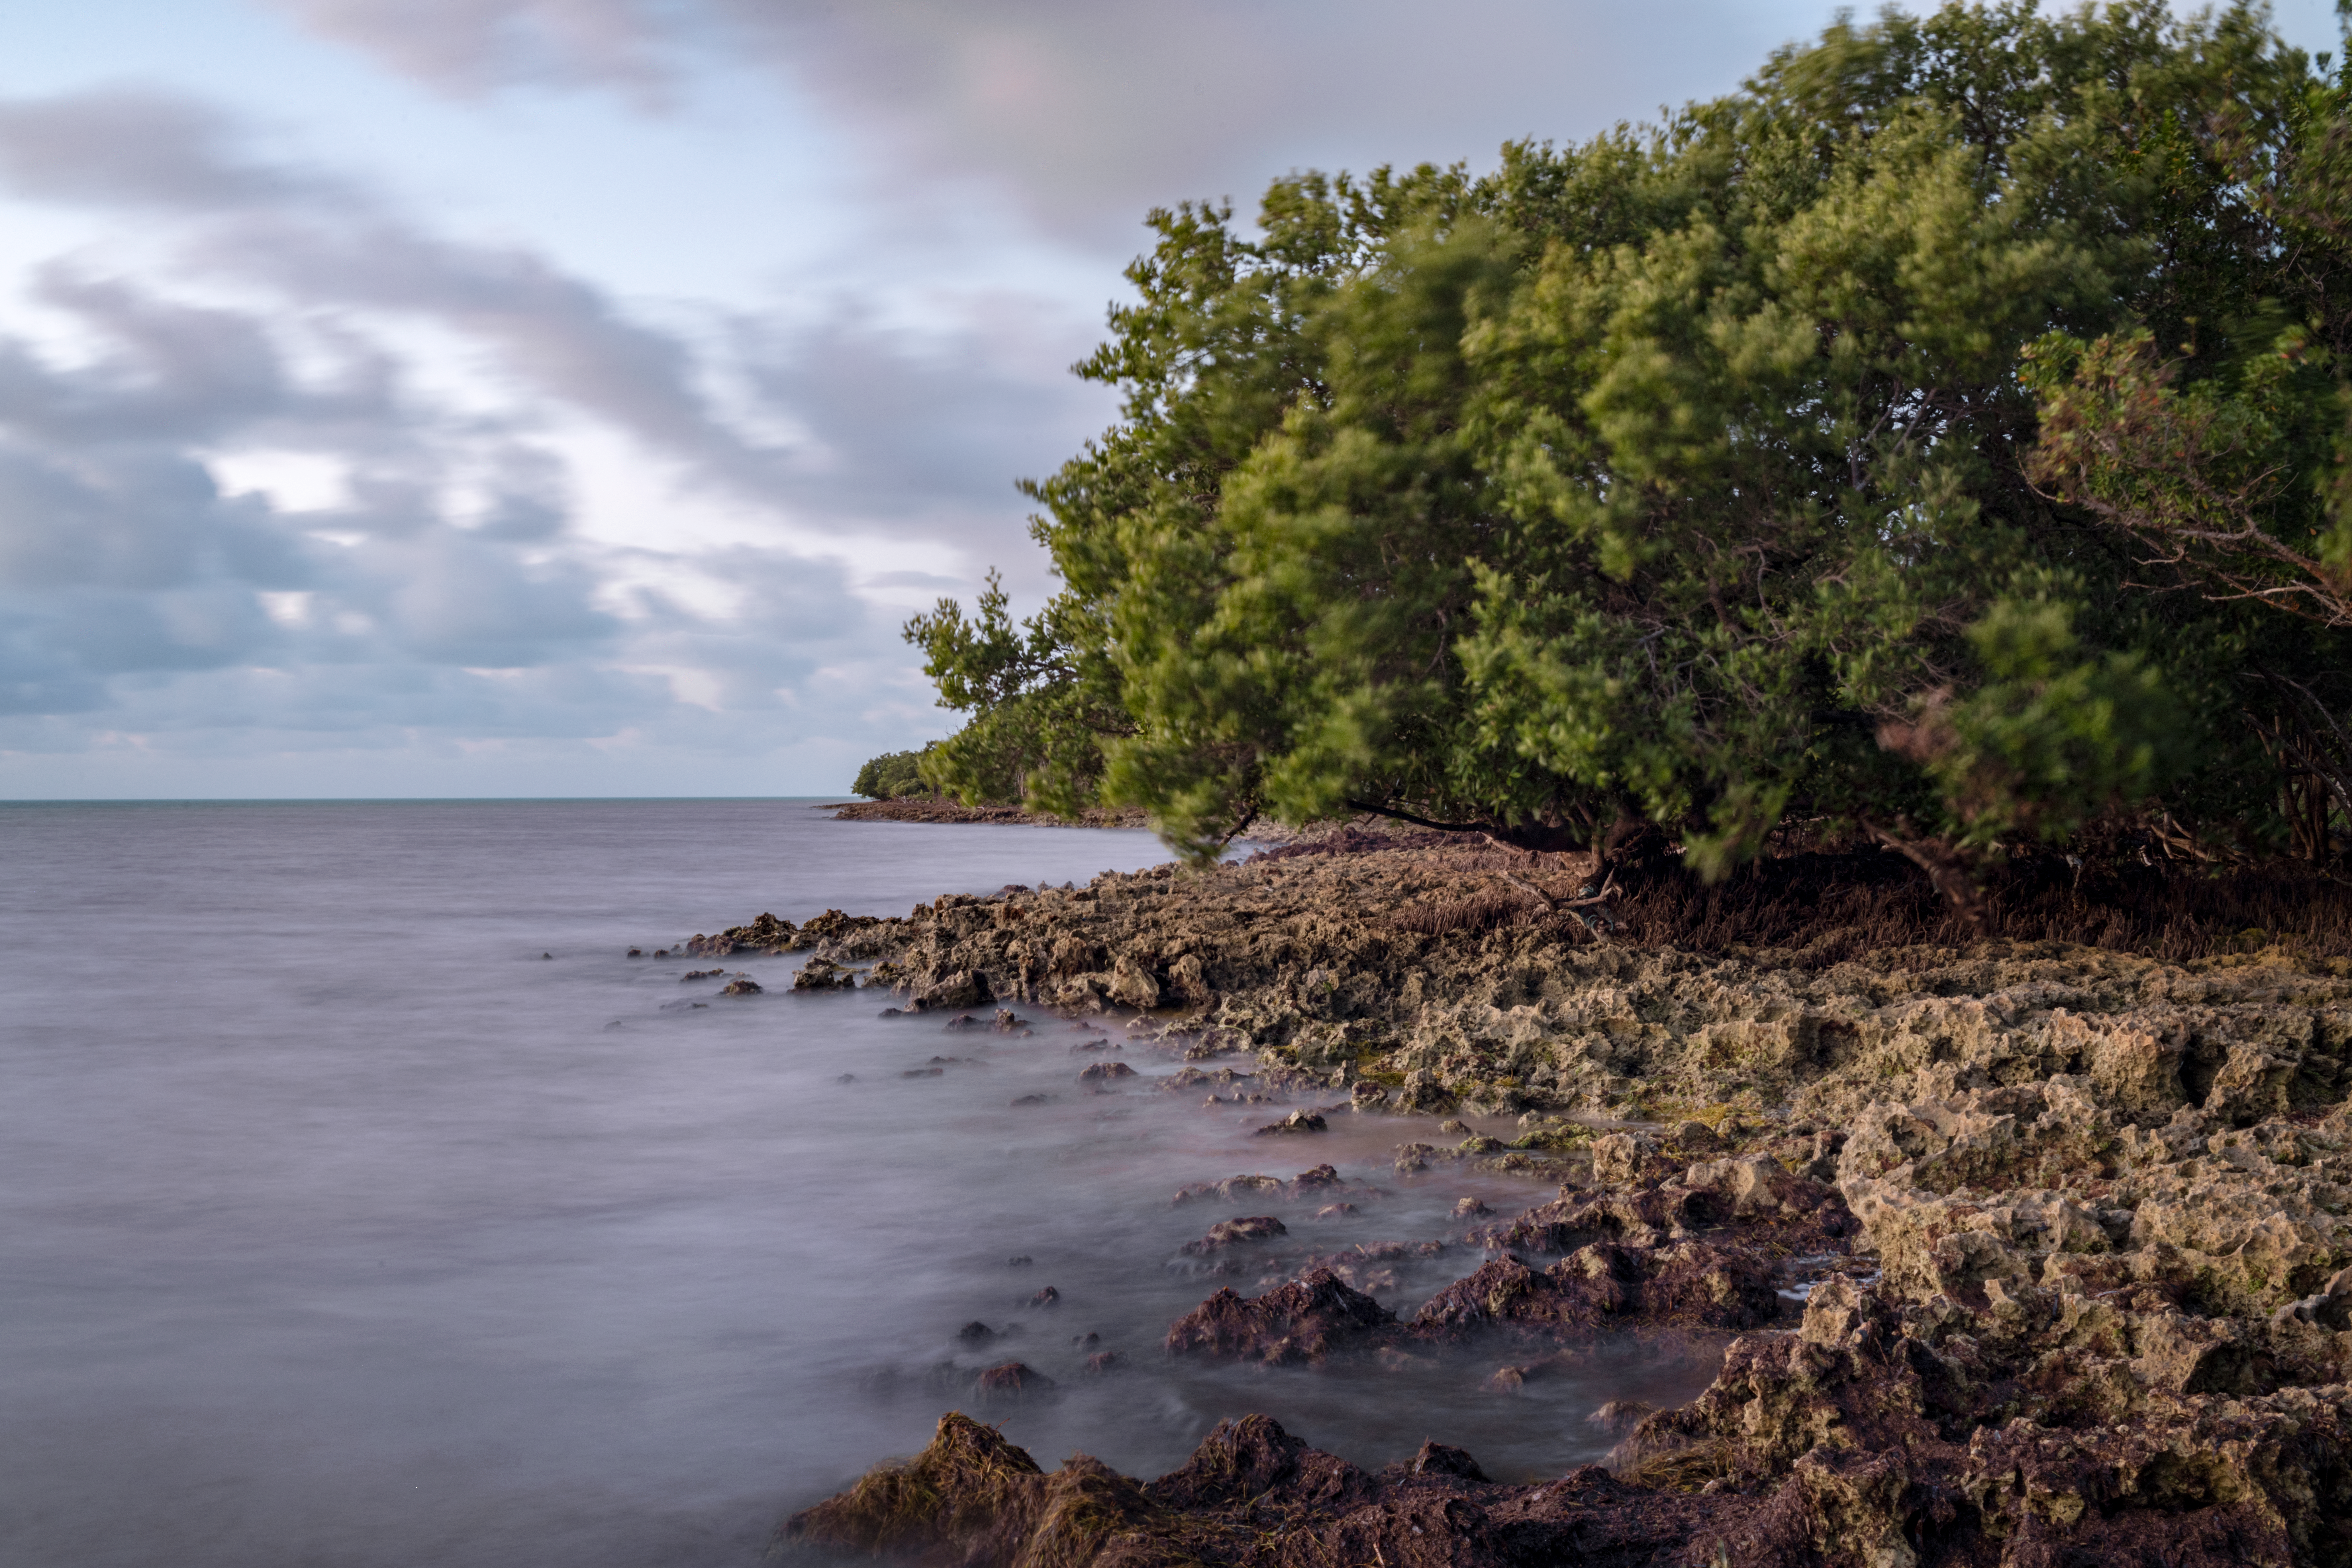 A long exposure photograph: on the left side are sky above and waves below, both show motion blur. On the right are mangrove trees whose leaves seem to move in the wind. Below is jagged coral rock seashore.